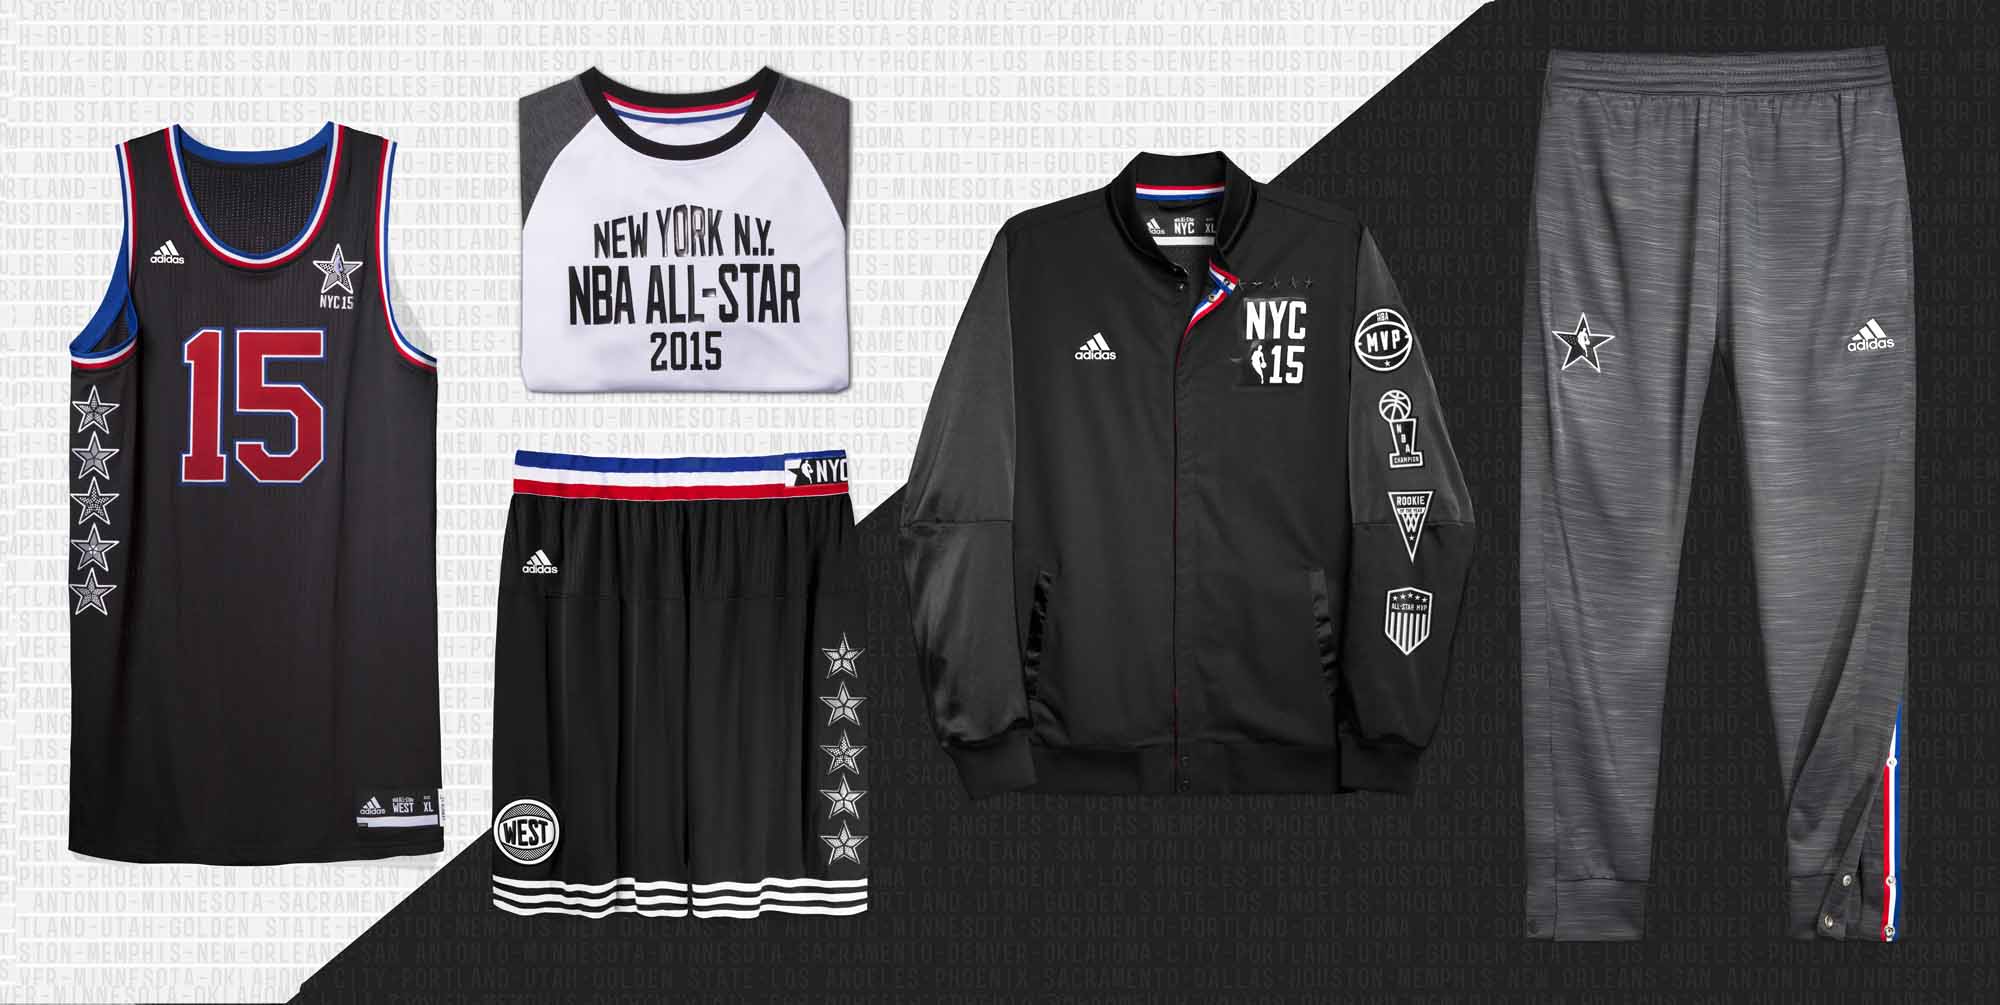 2015 NBA All Star Uniforms Inspired By NYC Basketball Culture